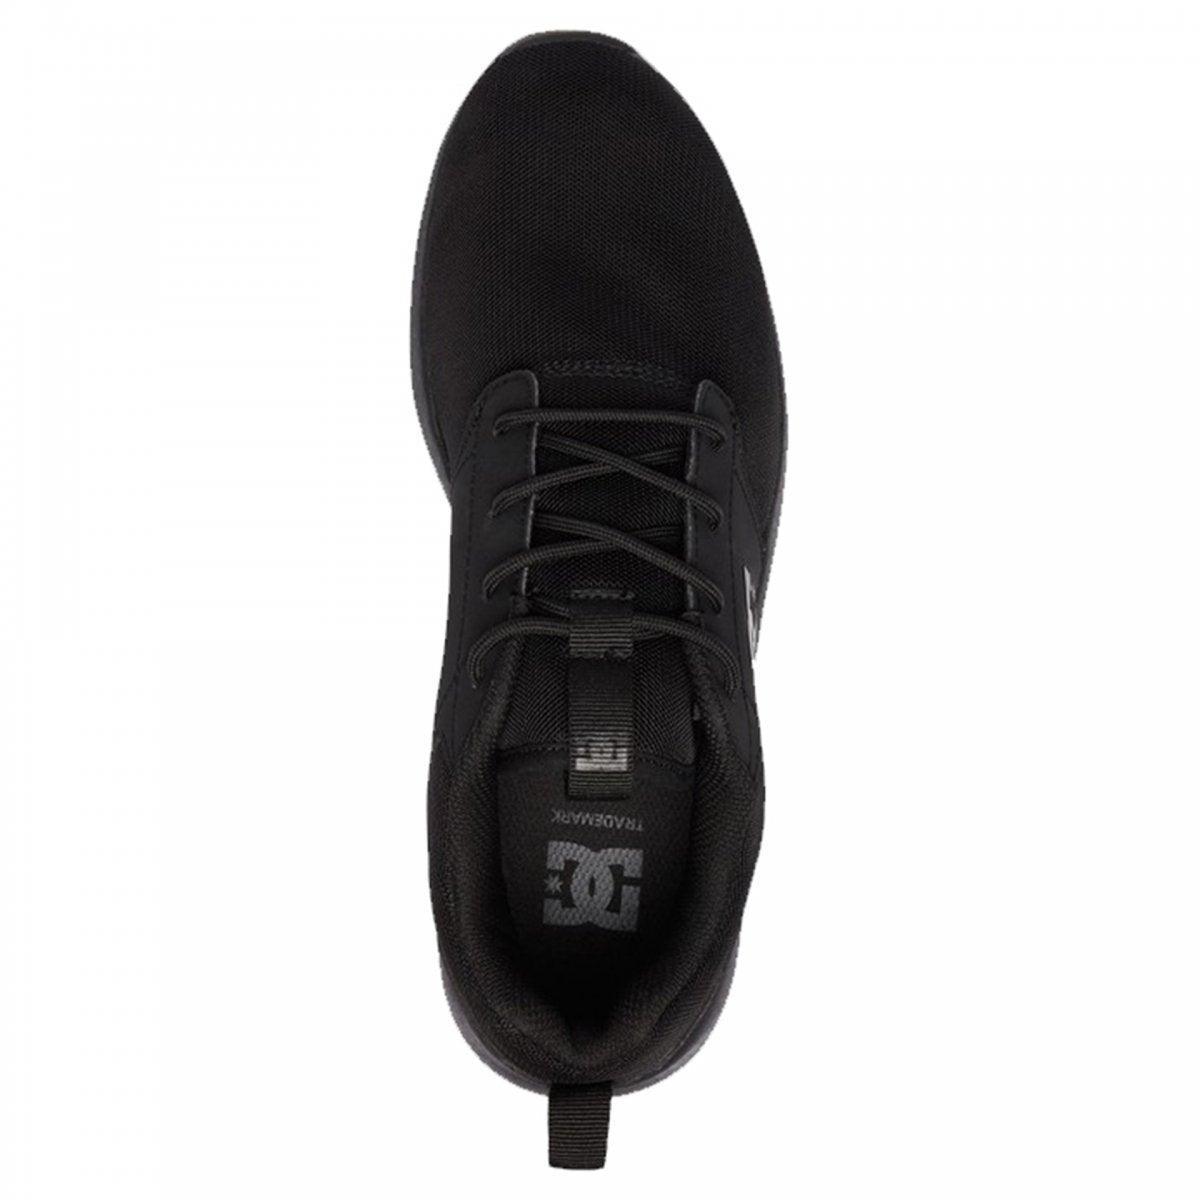 Zapatillas Dc Midway Sn Negro - Indy